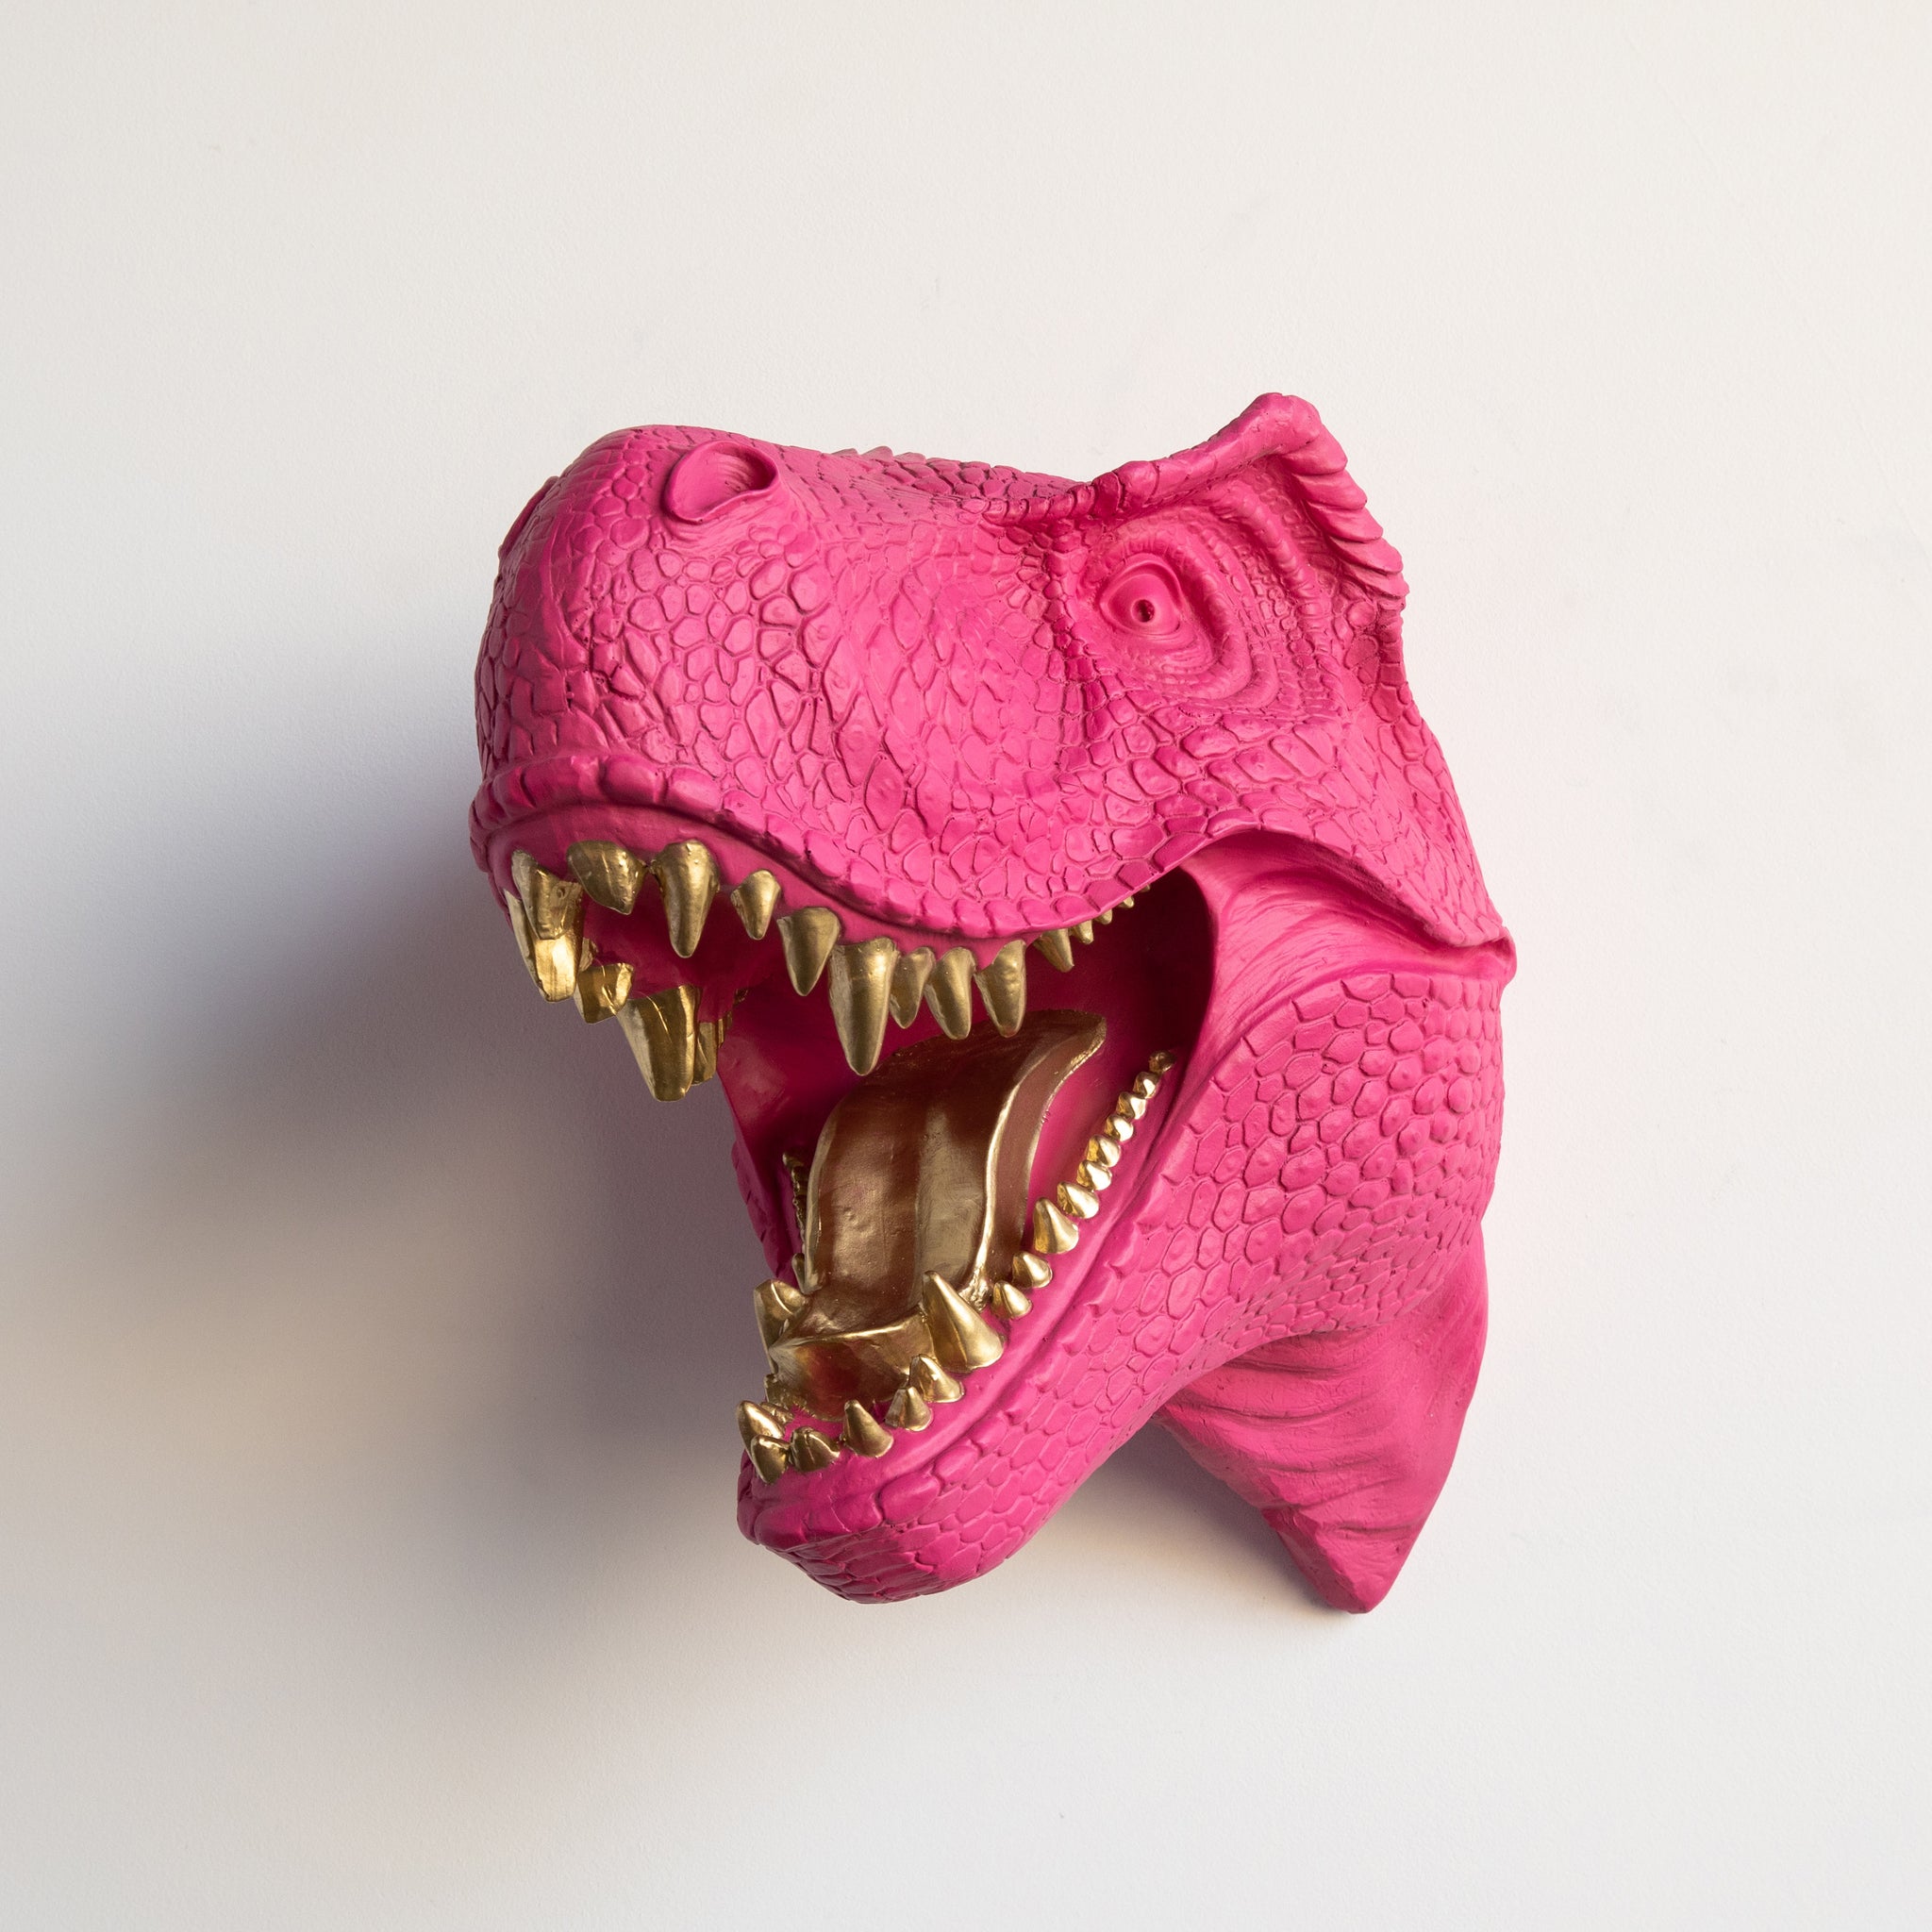 T-Rex Dinosaur Head Wall Mount // Hot Pink with Gold Teeth and Tongue